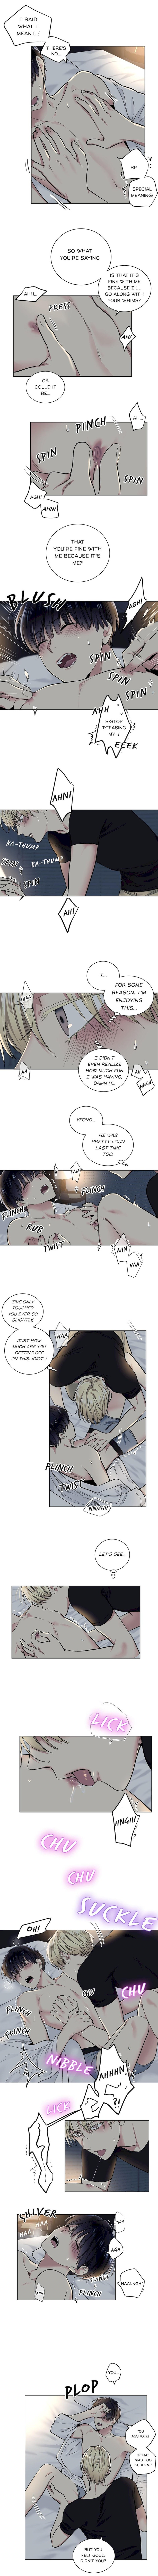 Shame Application - Chapter 12 Page 4